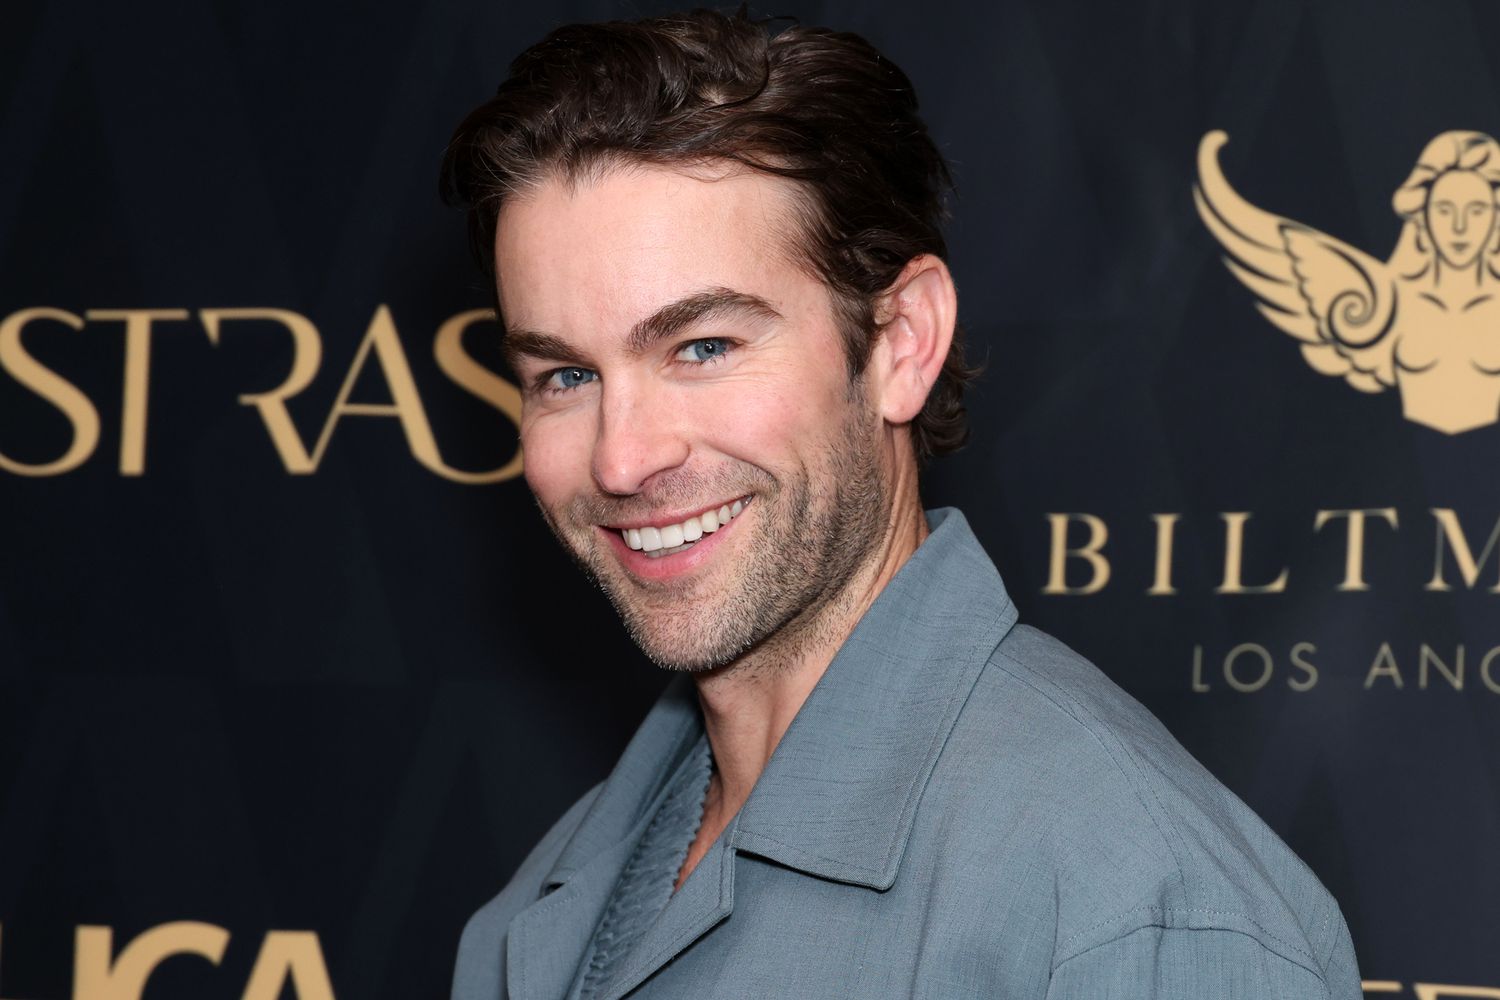 Chace Crawford Shares His Diet, Splurges and Favorite Snacks [Video]